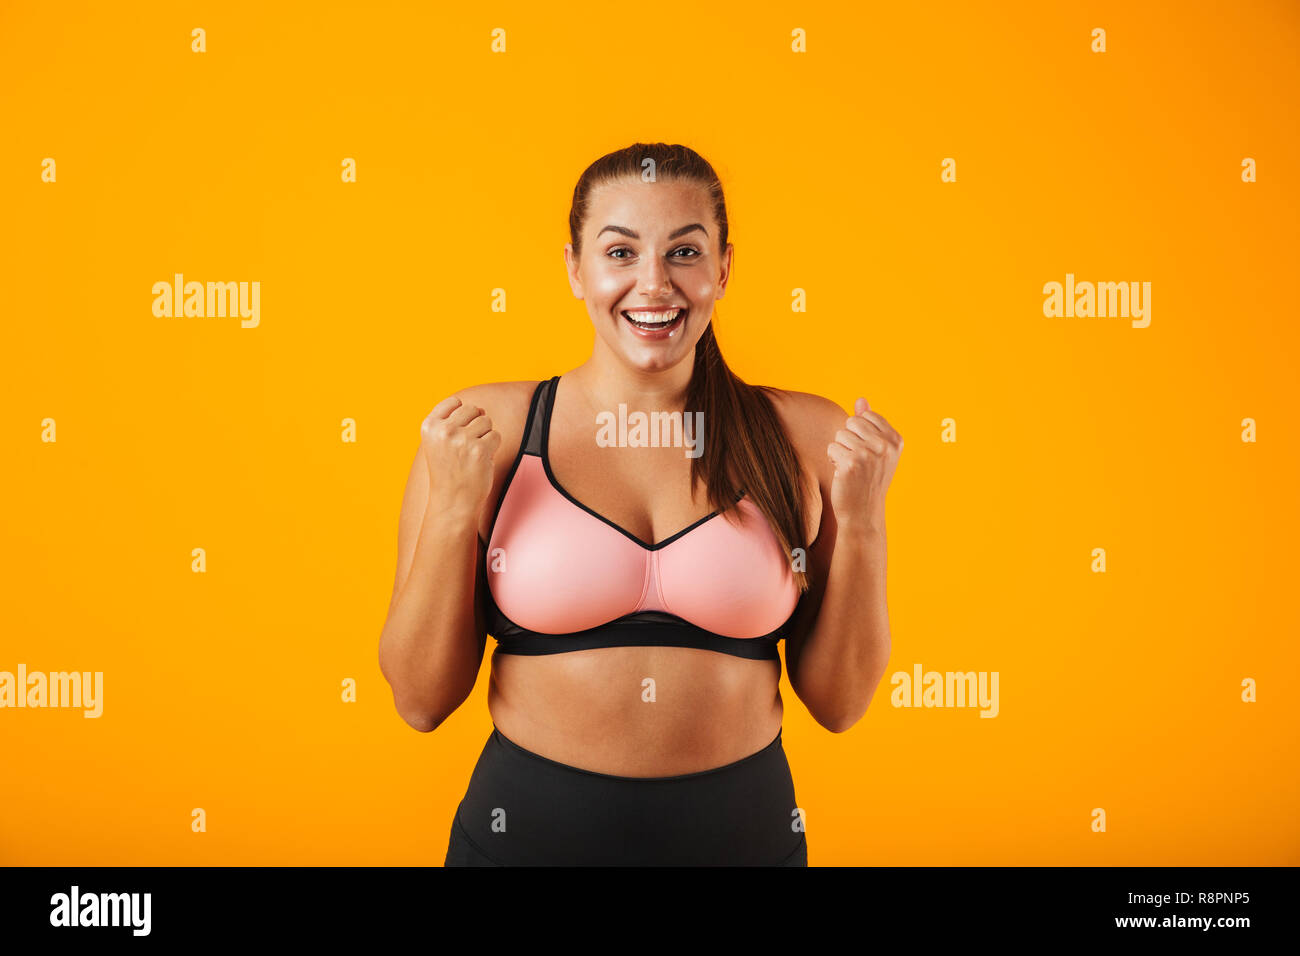 Portrait of happy chubby woman in sportive bra smiling and